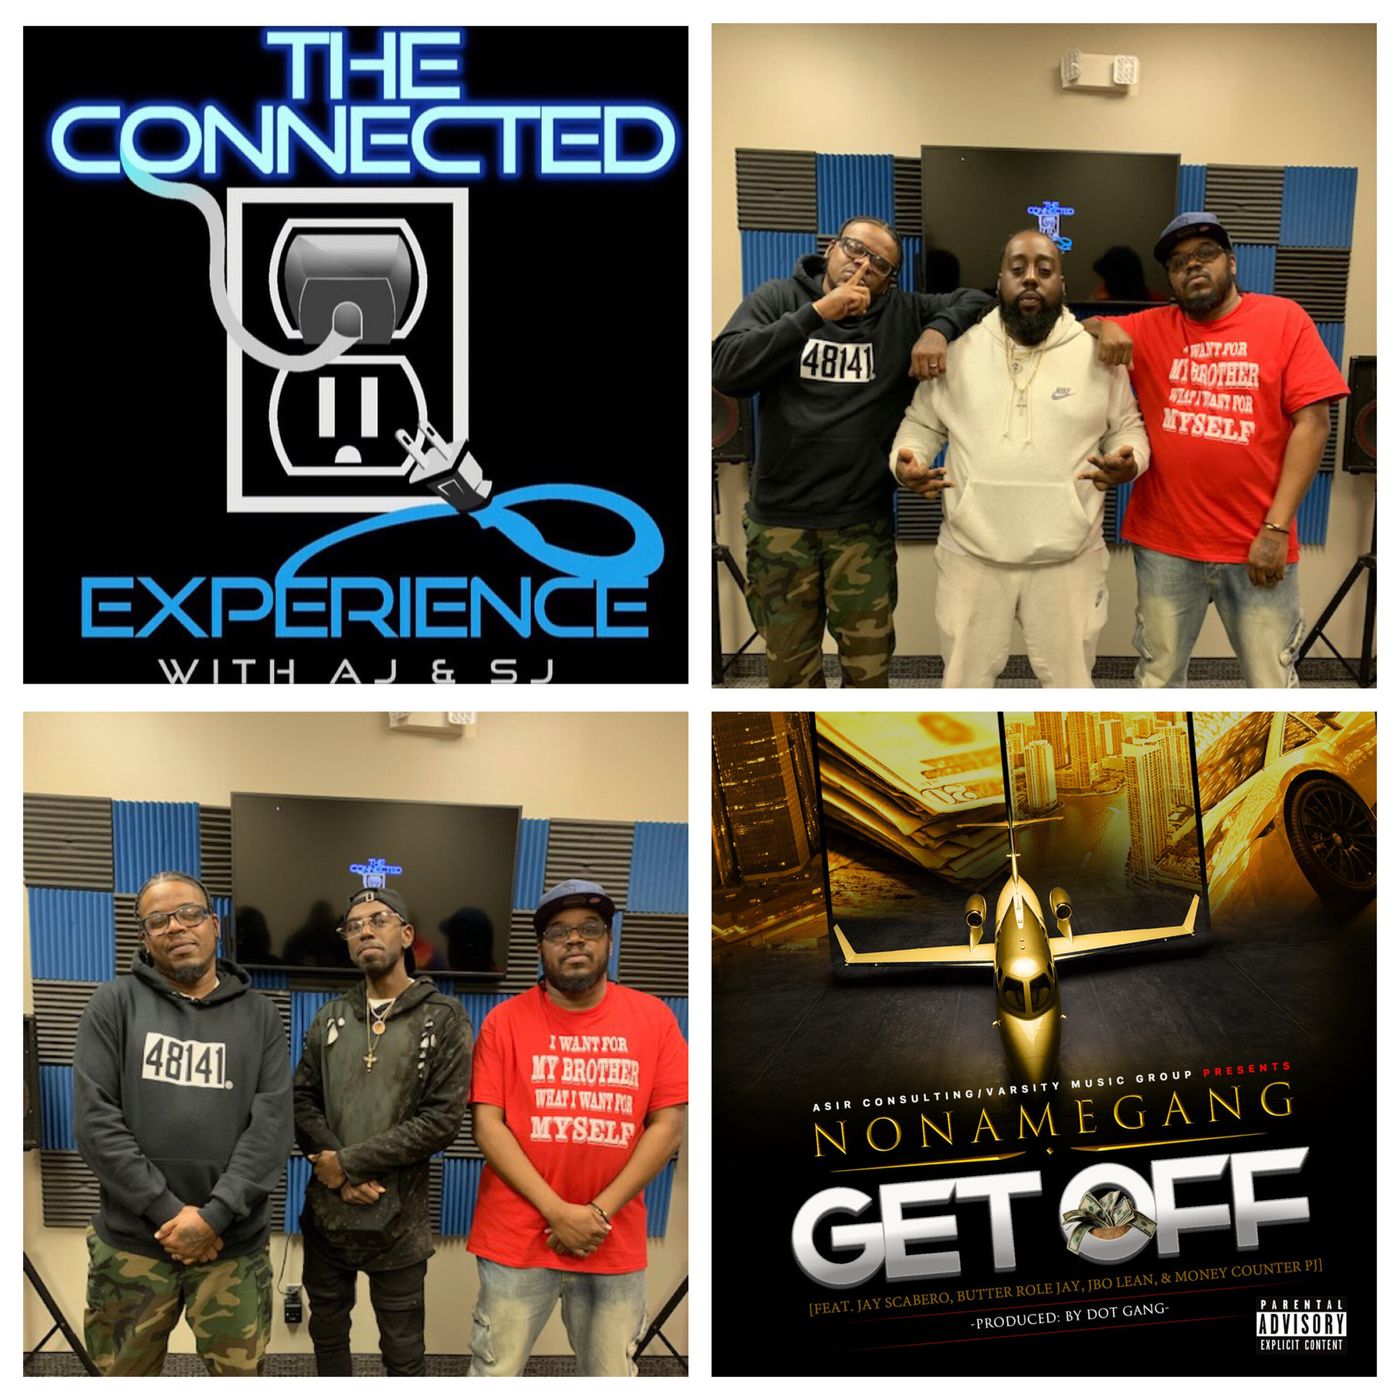 The Connected Experience F/ No Name Gang